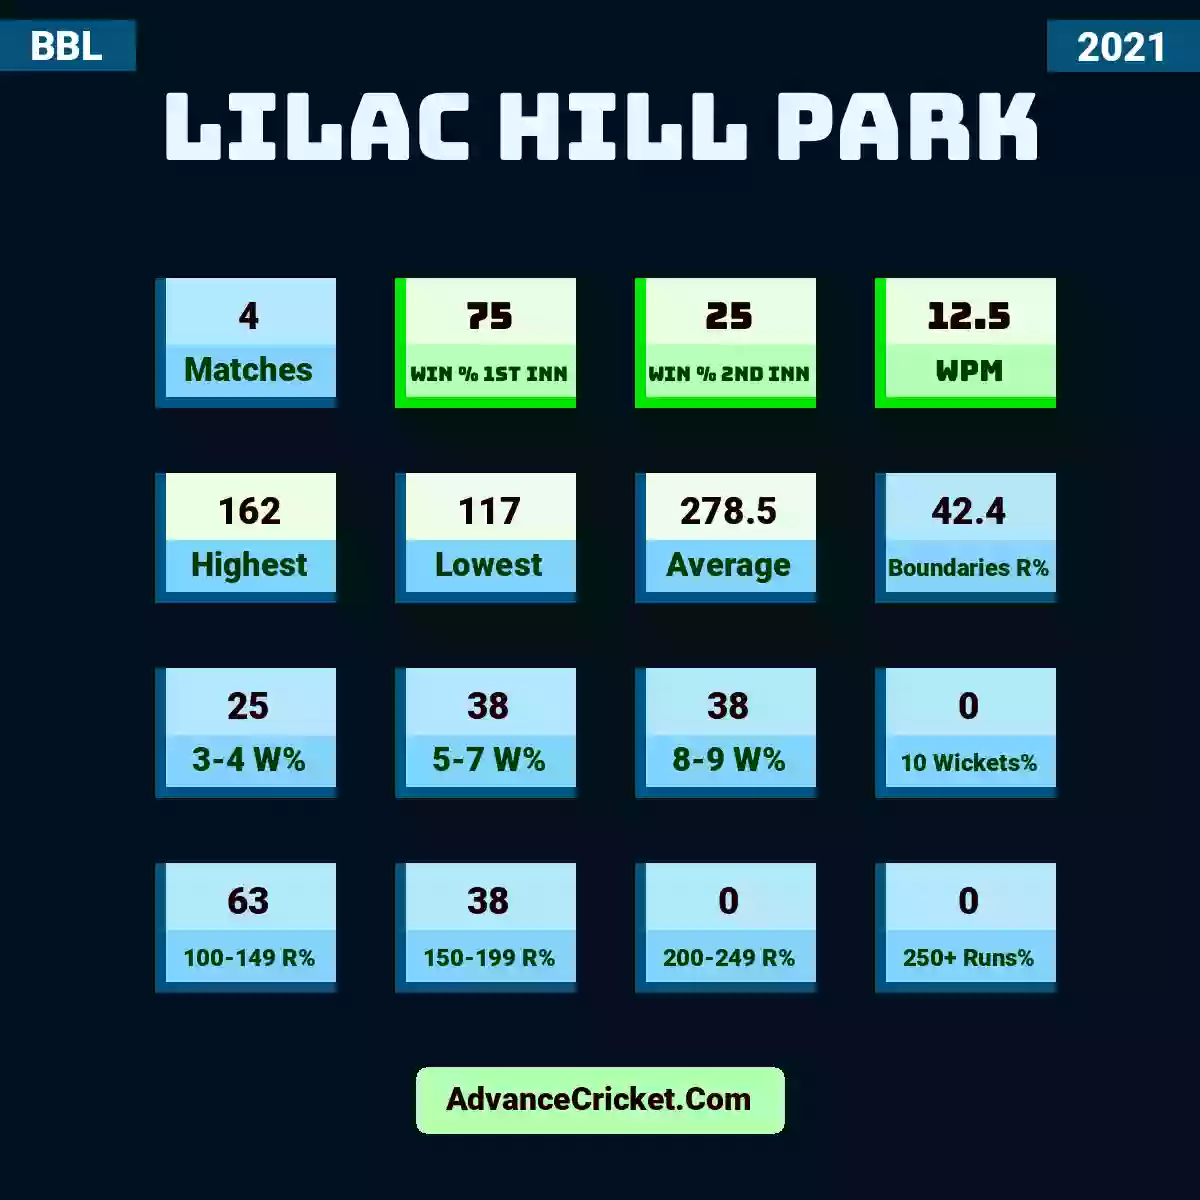 Image showing Lilac Hill Park with Matches: 4, Win % 1st Inn: 75, Win % 2nd Inn: 25, WPM: 12.5, Highest: 162, Lowest: 117, Average: 278.5, Boundaries R%: 42.4, 3-4 W%: 25, 5-7 W%: 38, 8-9 W%: 38, 10 Wickets%: 0, 100-149 R%: 63, 150-199 R%: 38, 200-249 R%: 0, 250+ Runs%: 0.